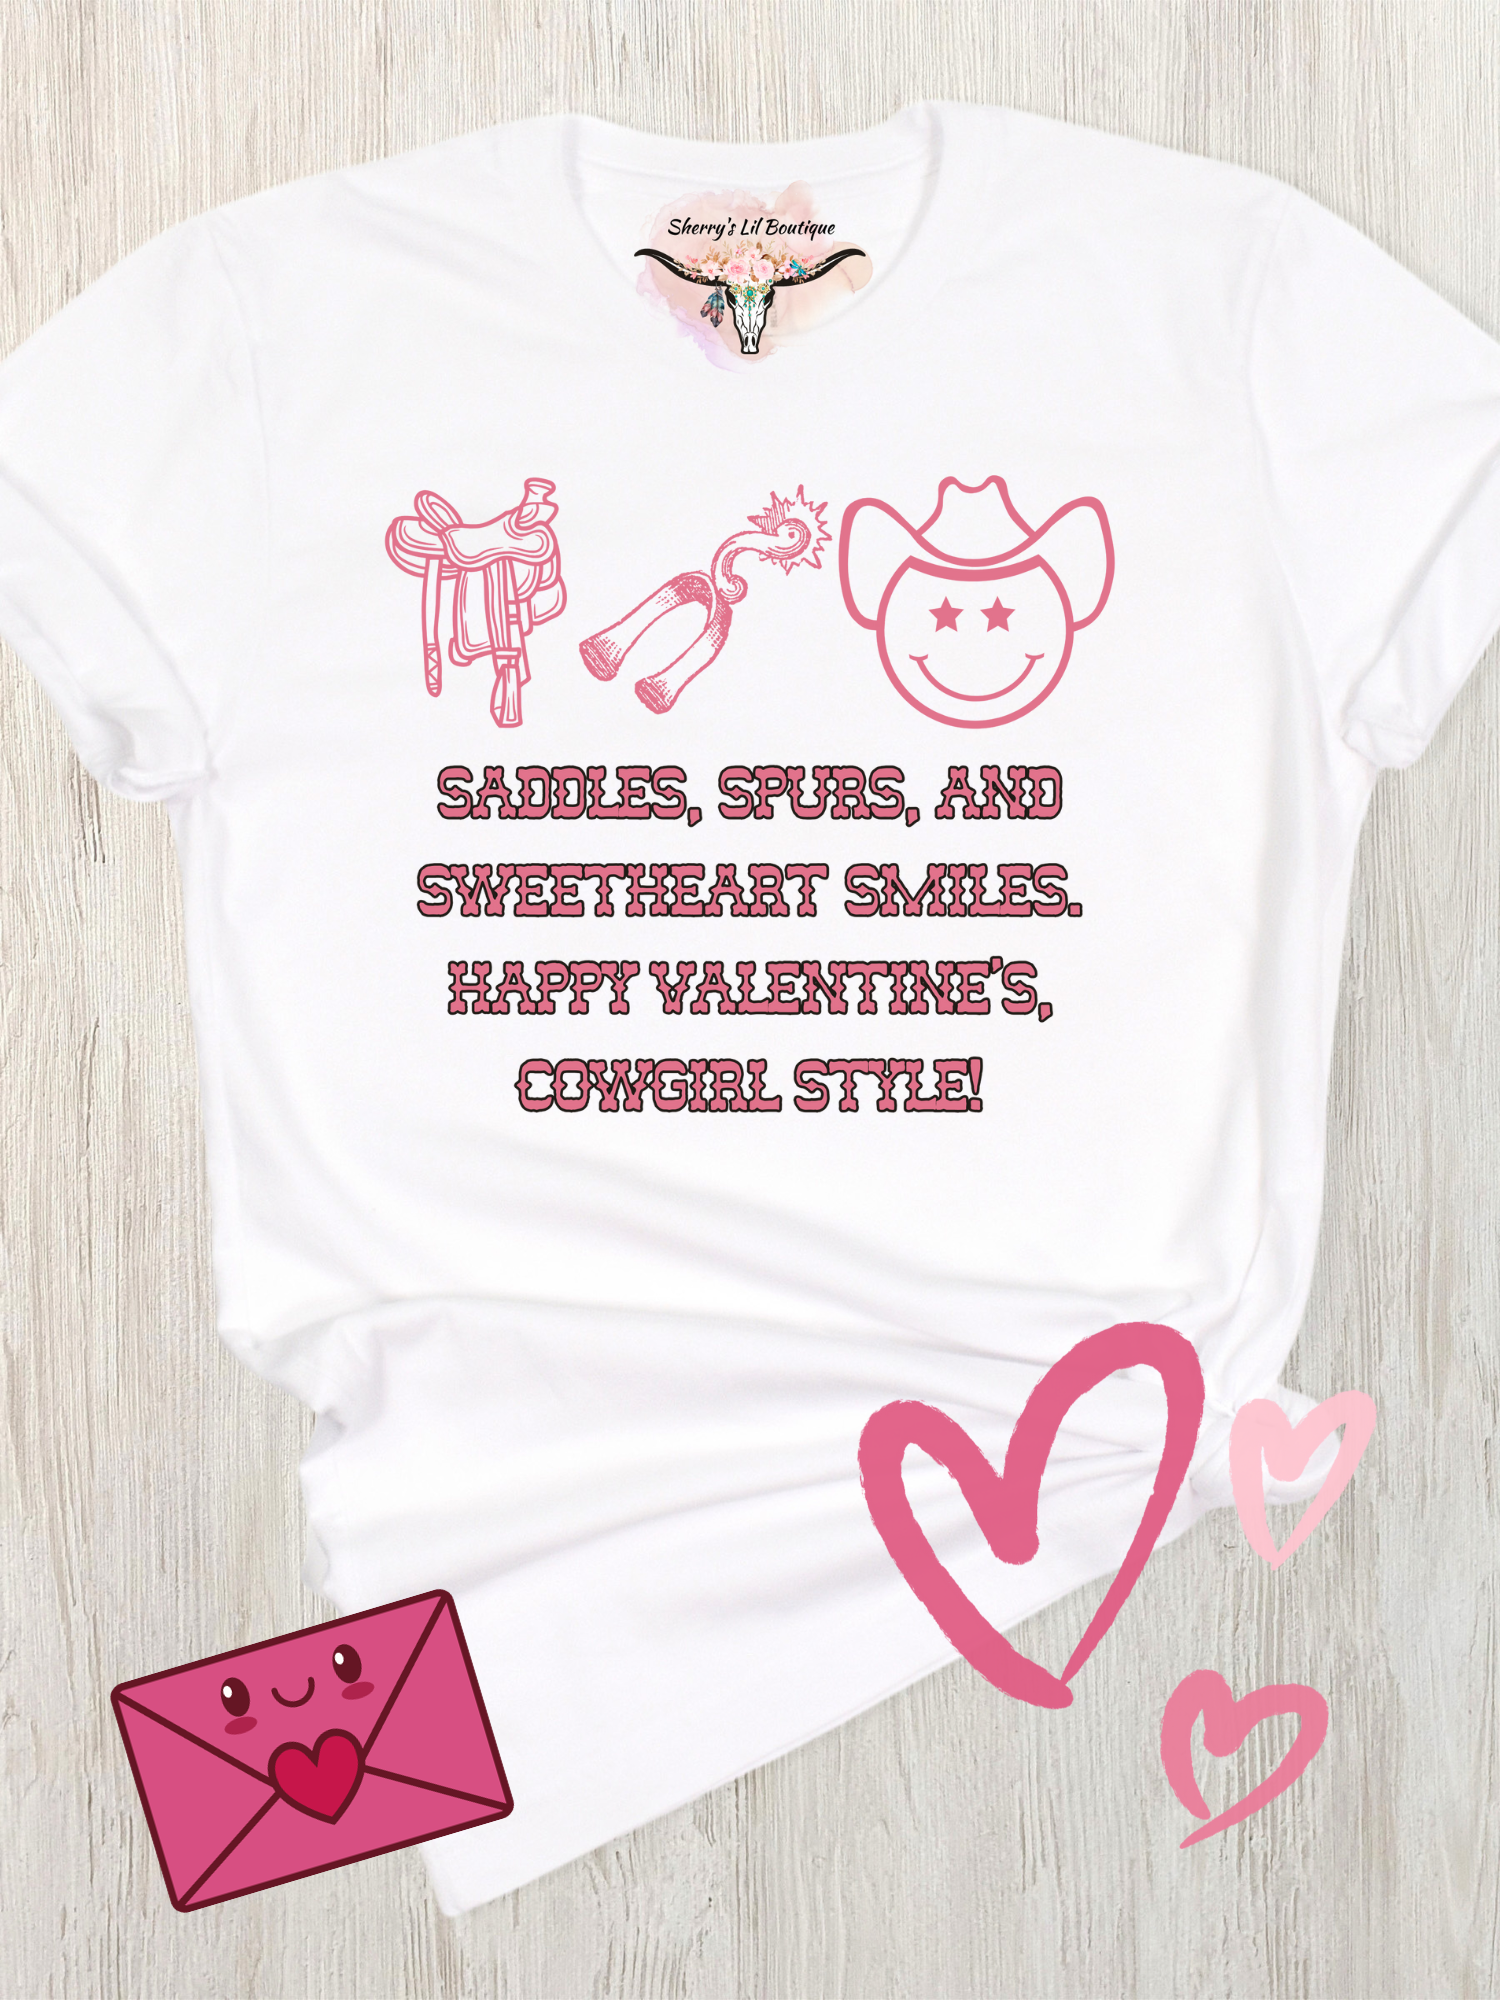 White tee - Saddles, Spurs and sweetheart smiles graphic design